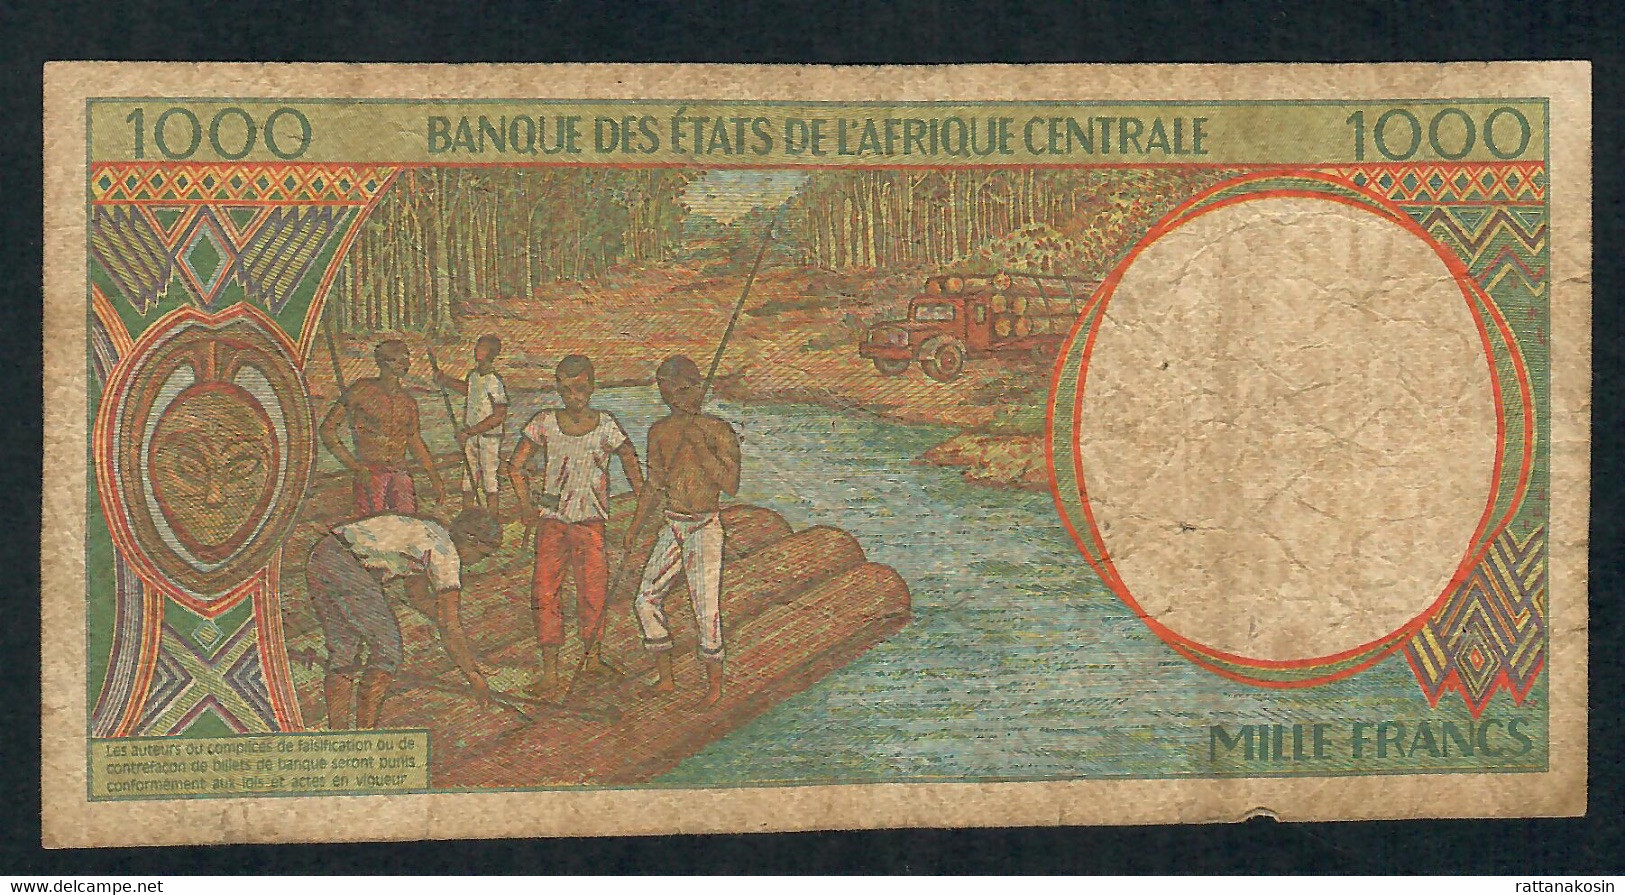 CENTRAL AFRICAN STATES GABON P402Lc  1000  FRANCS 1995  VF - Stati Centrafricani